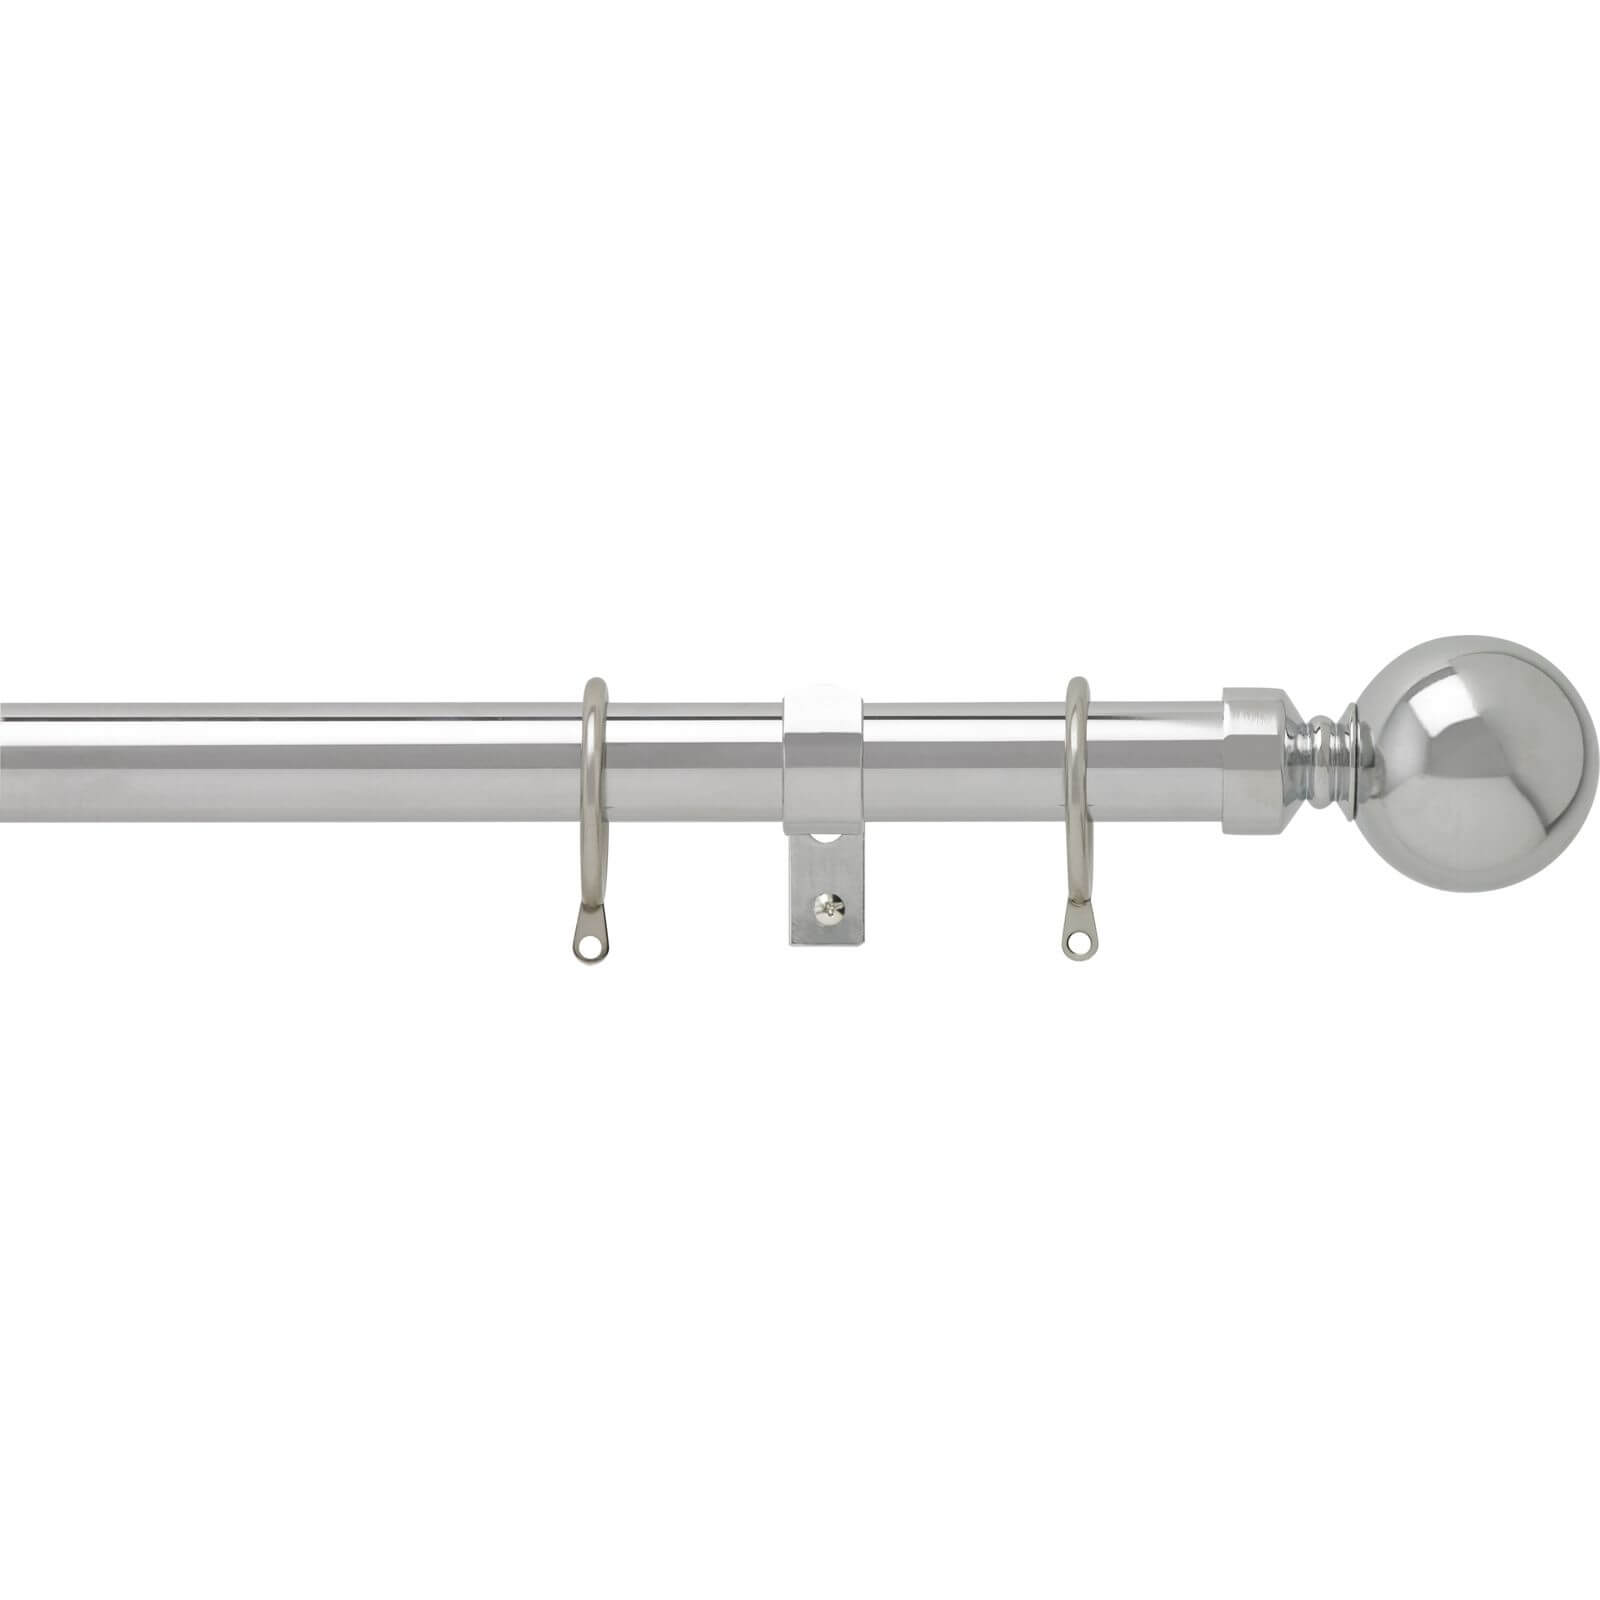 Chrome 28mm Fixed Curtain Pole With Ball 2.4m